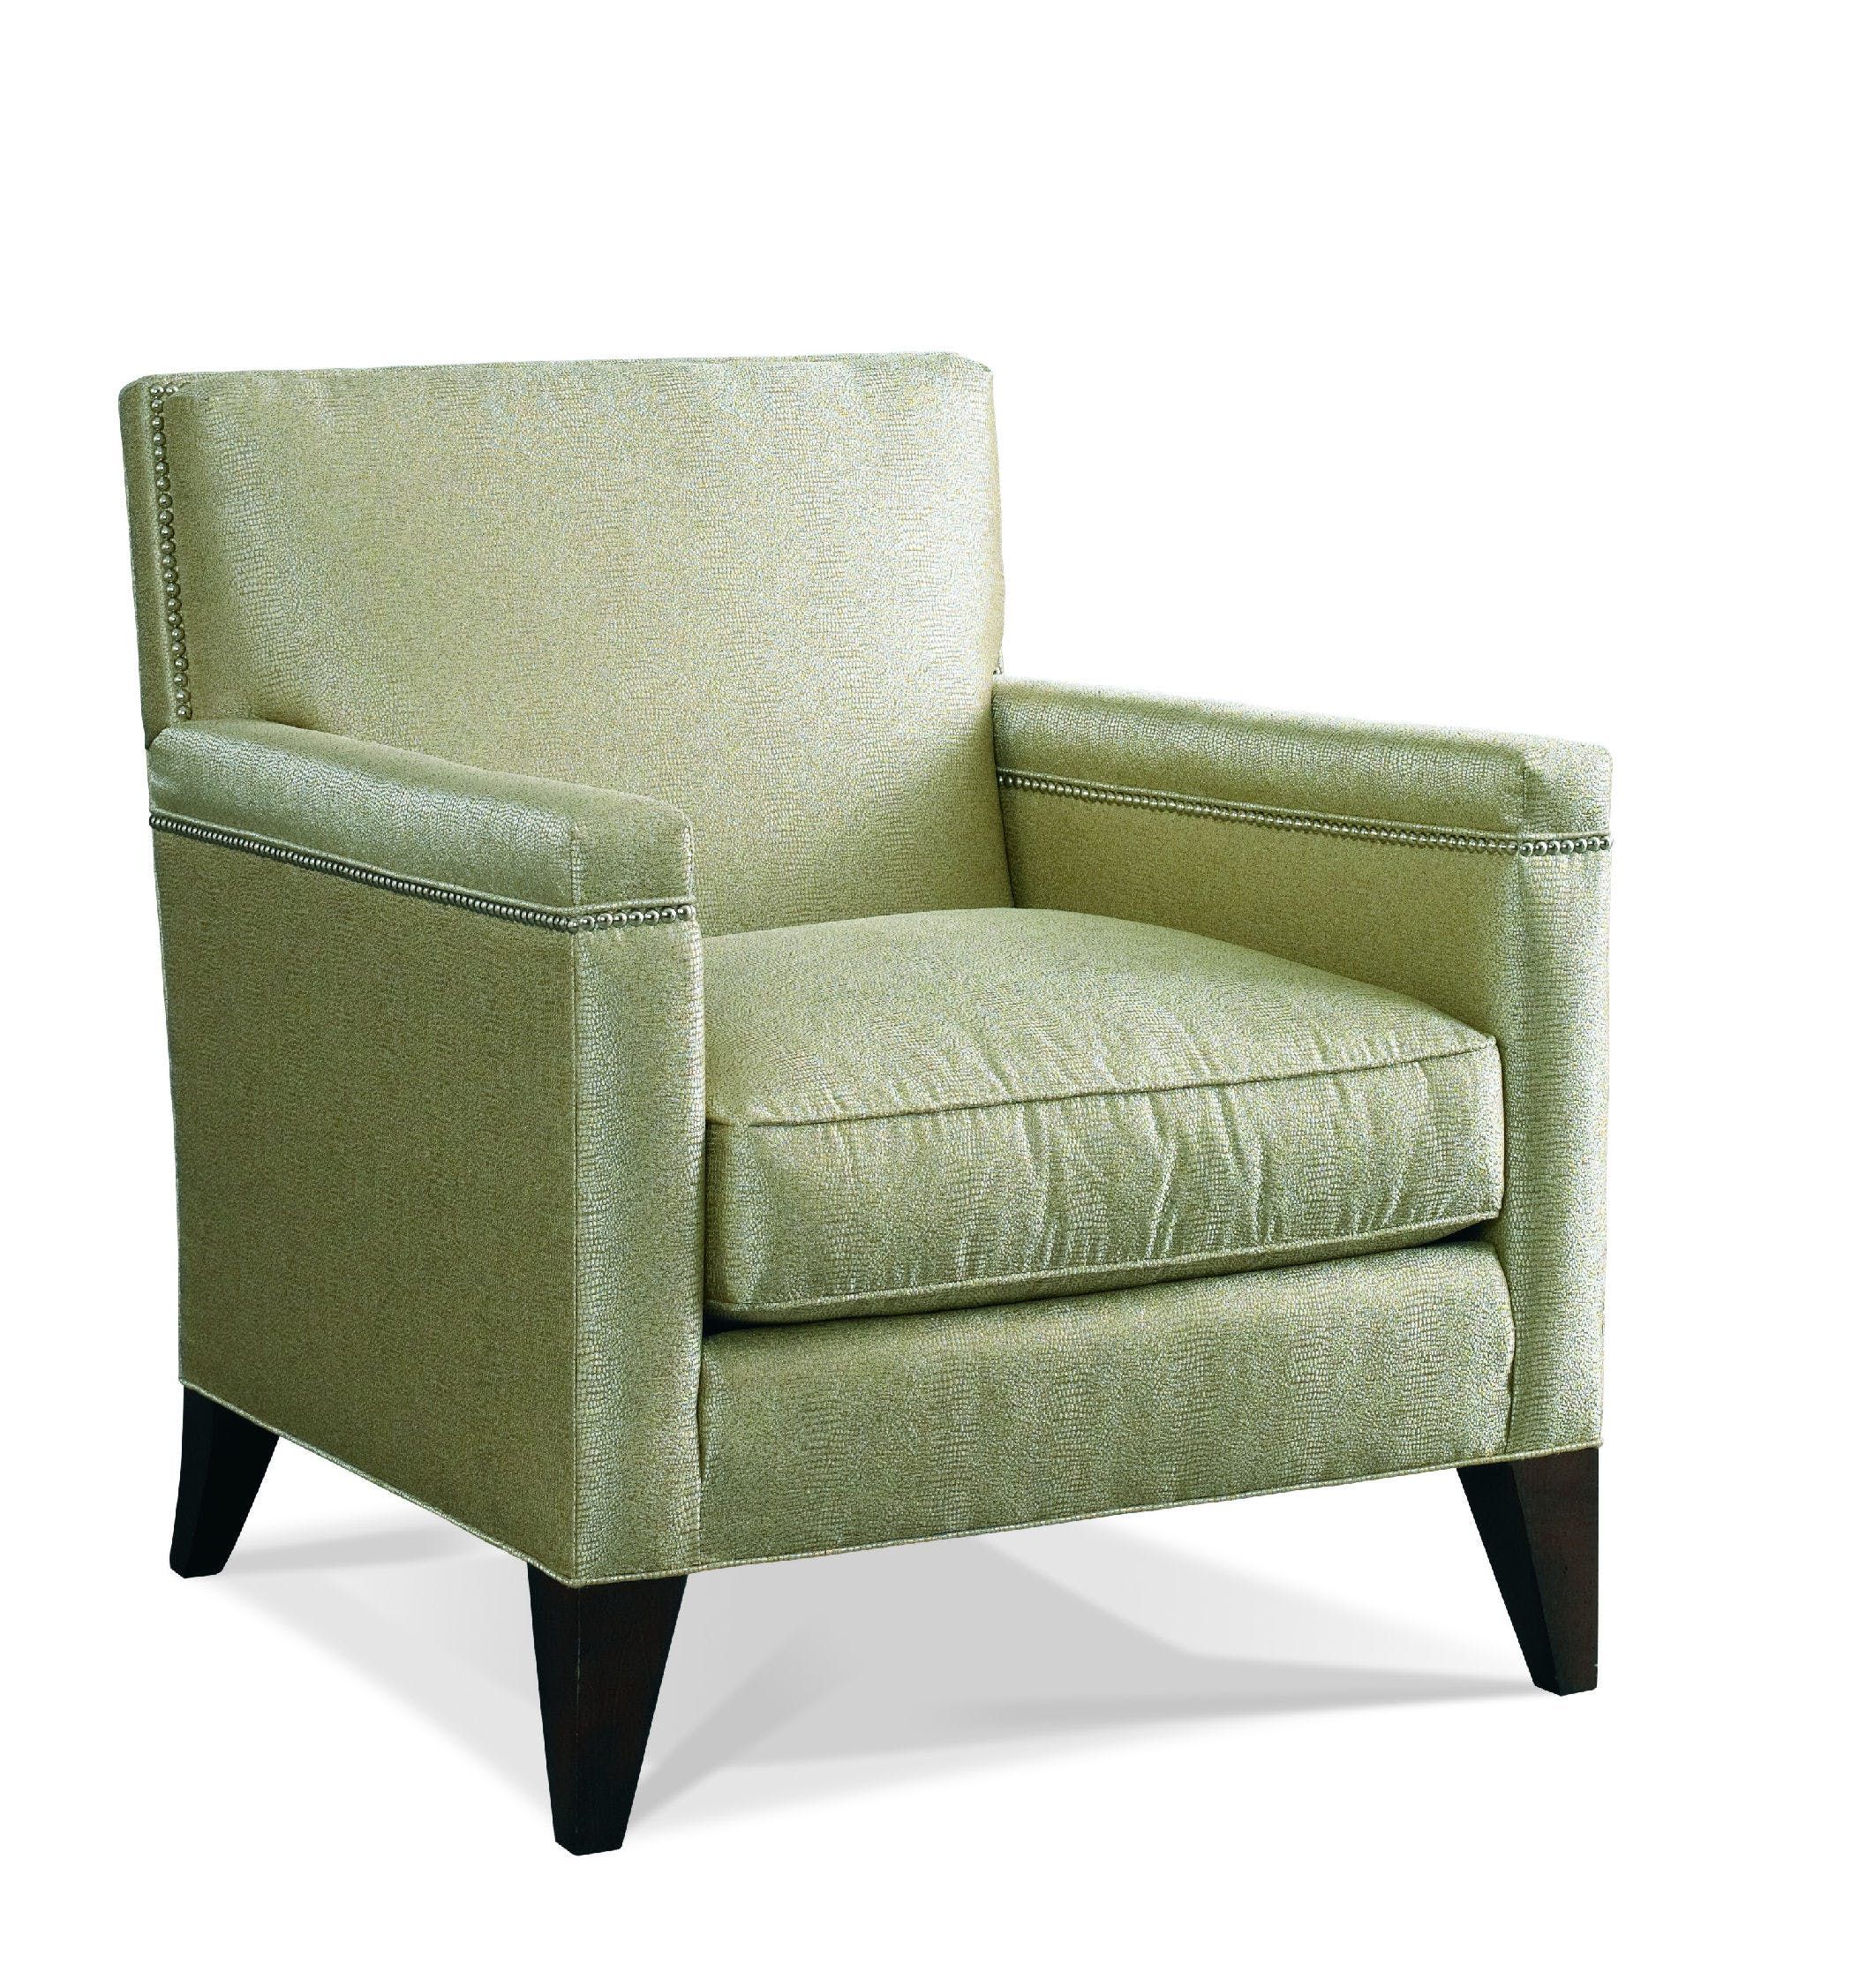 Living Room Upholstered Arm Chair At Greenbaum Small Bedroom Inside Armory Fabric Armchairs (Photo 5 of 15)